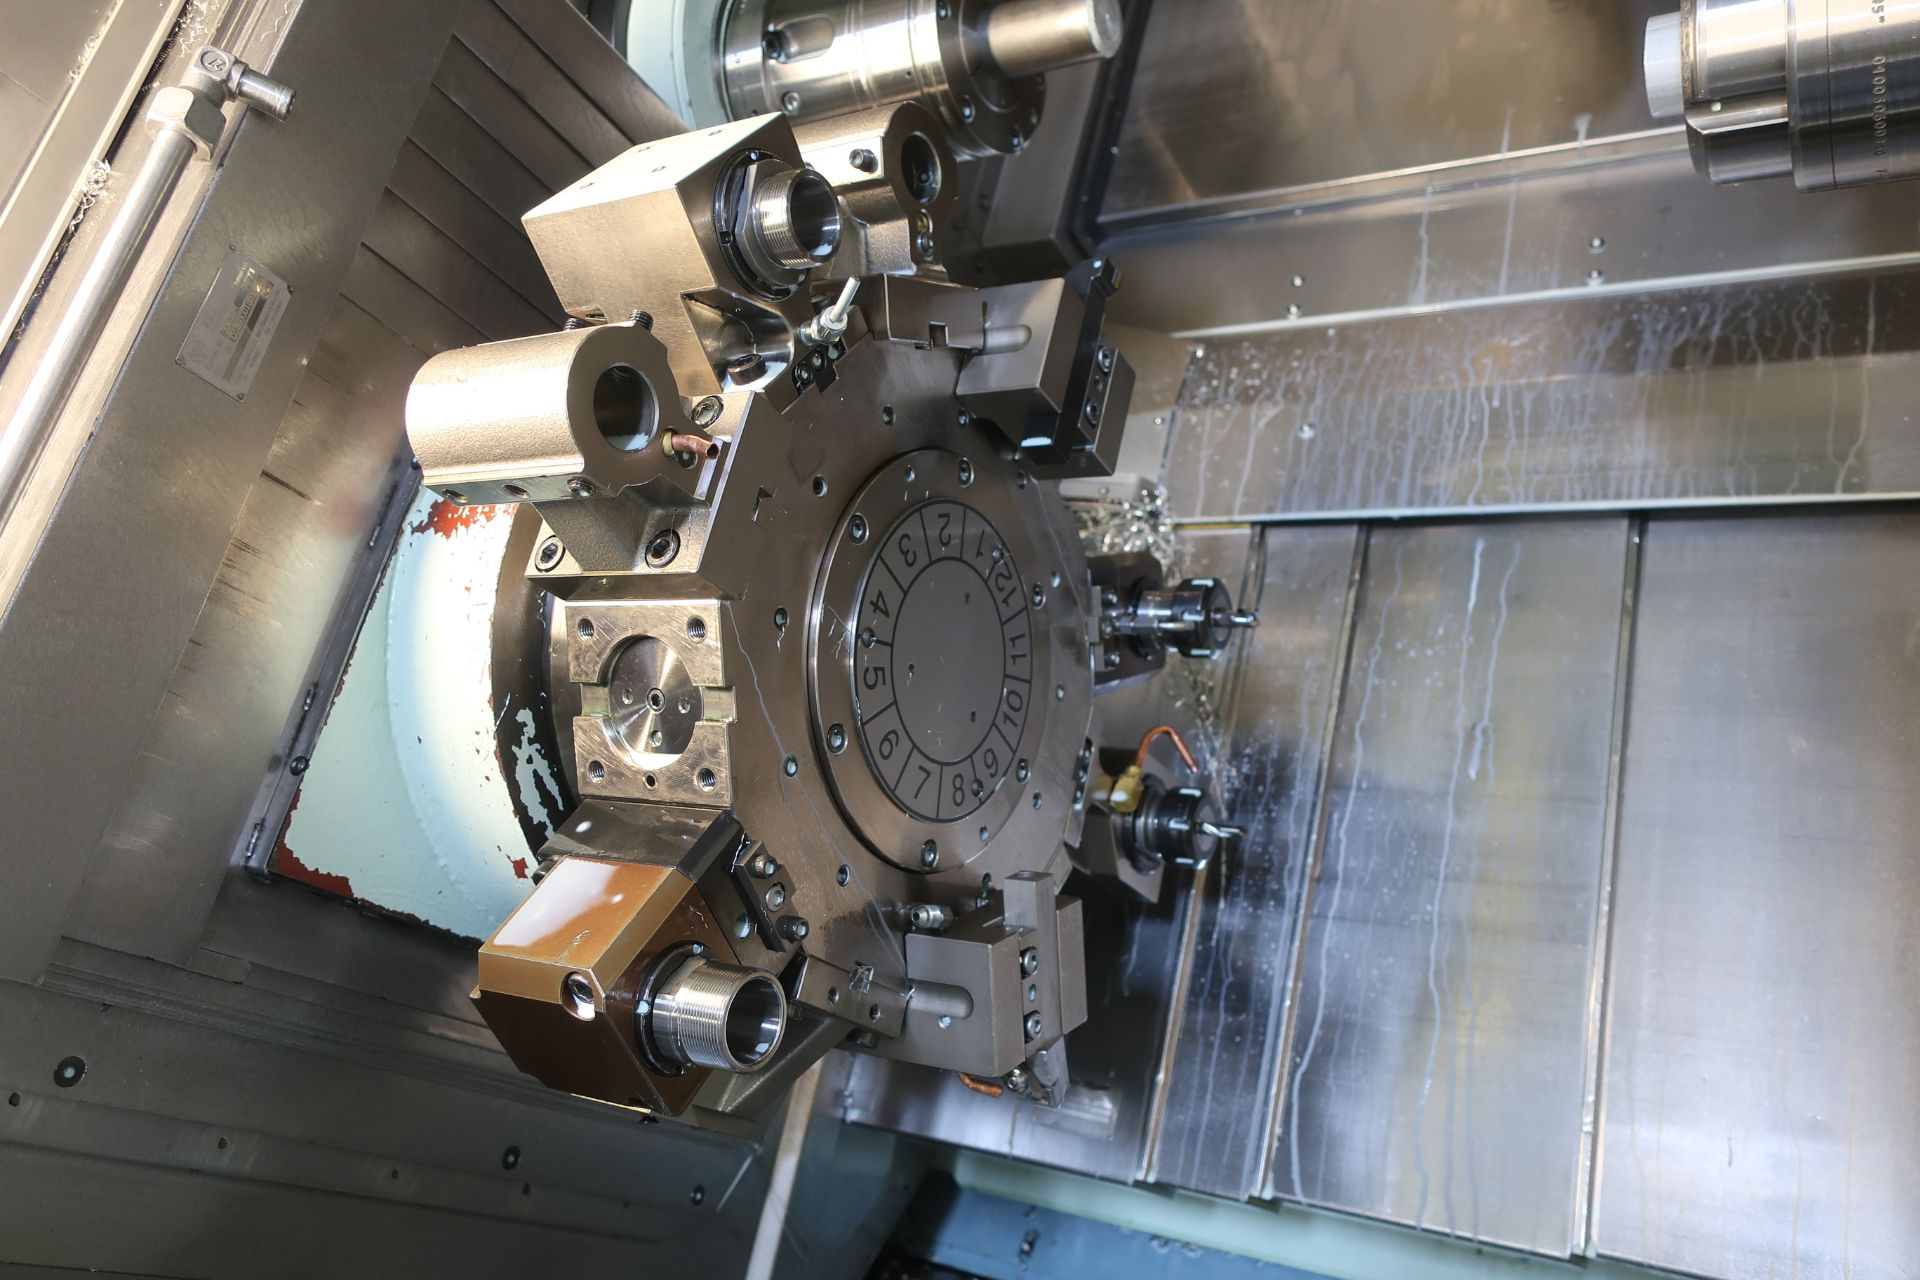 EUROTECH B465 Y2 QUATROFLEX TWIN SPINDLE TWIN TURRET CNC LATHE W/DUAL Y-AXIS, NEW 2011, SN 11045 - Image 4 of 19